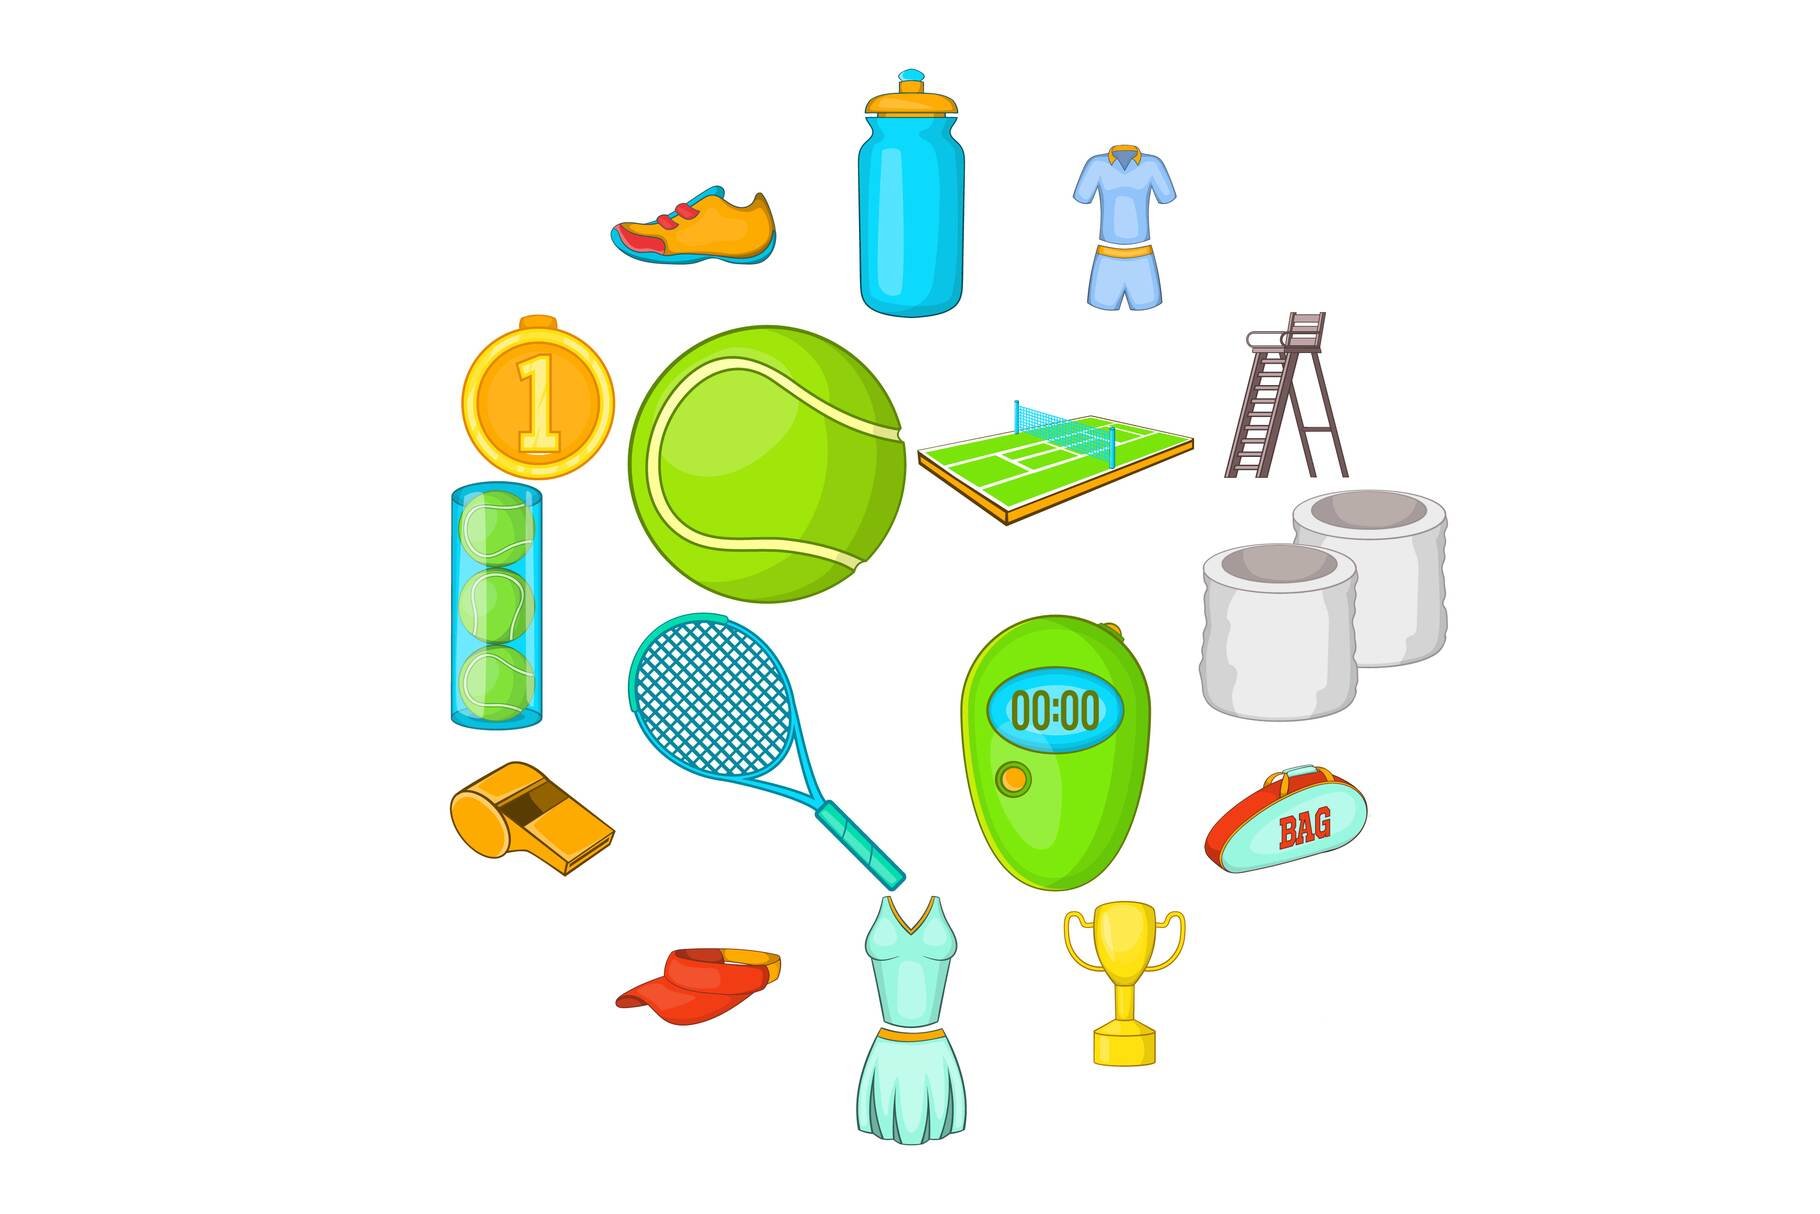 Tennis icons set, cartoon style cover image.